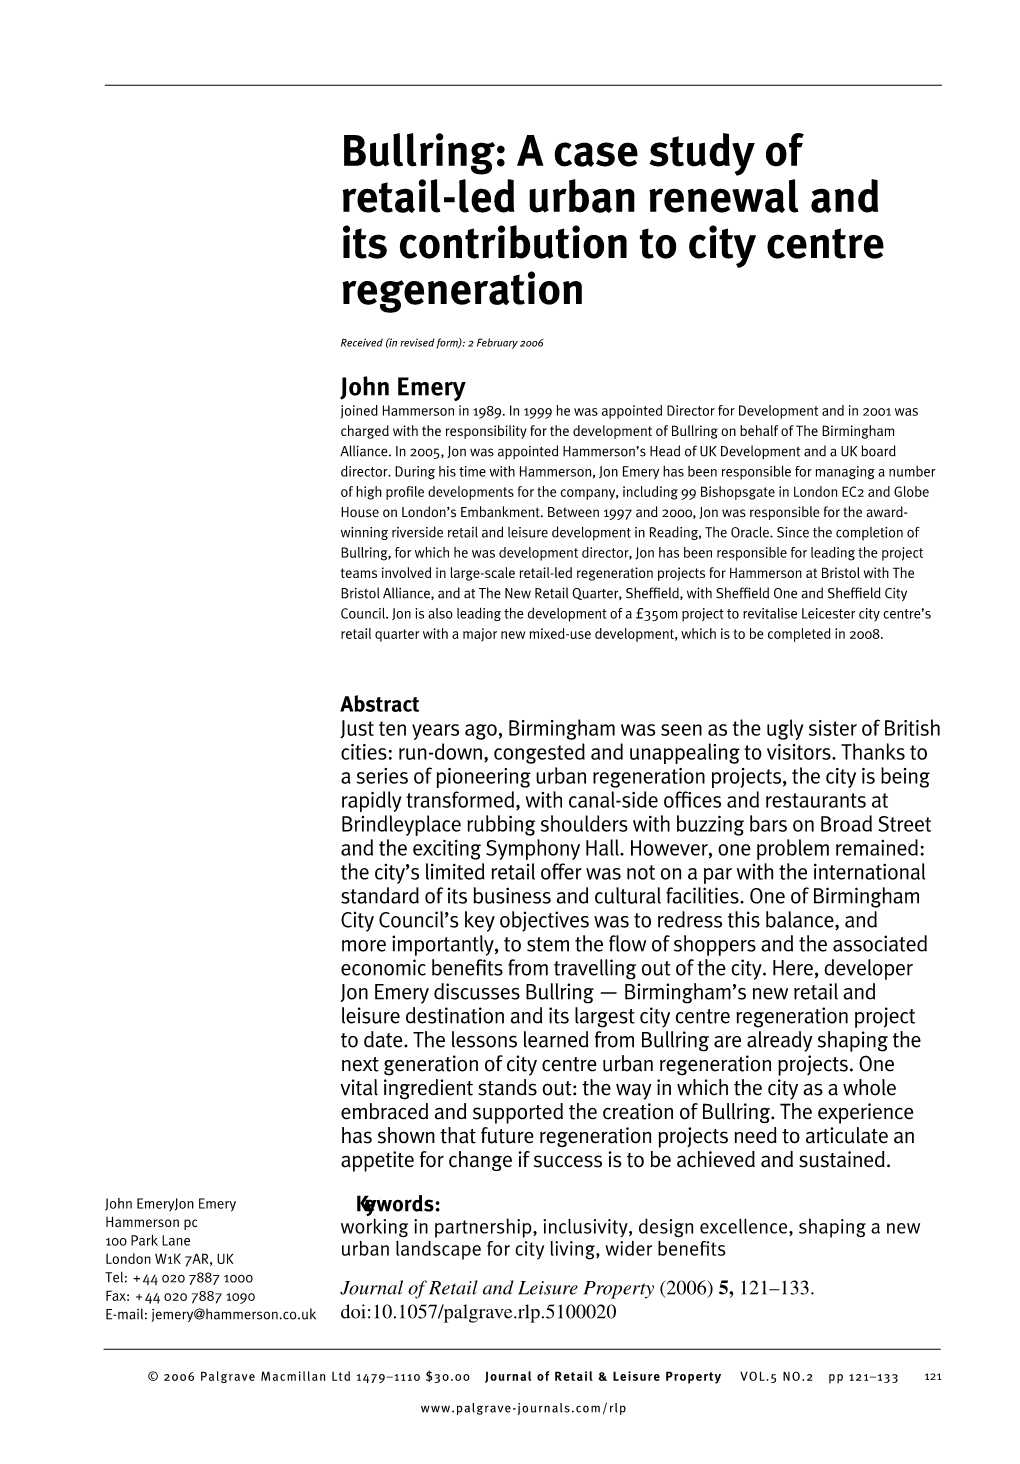 Bullring: a Case Study of Retail-Led Urban Renewal and Its Contribution to City Centre Regeneration